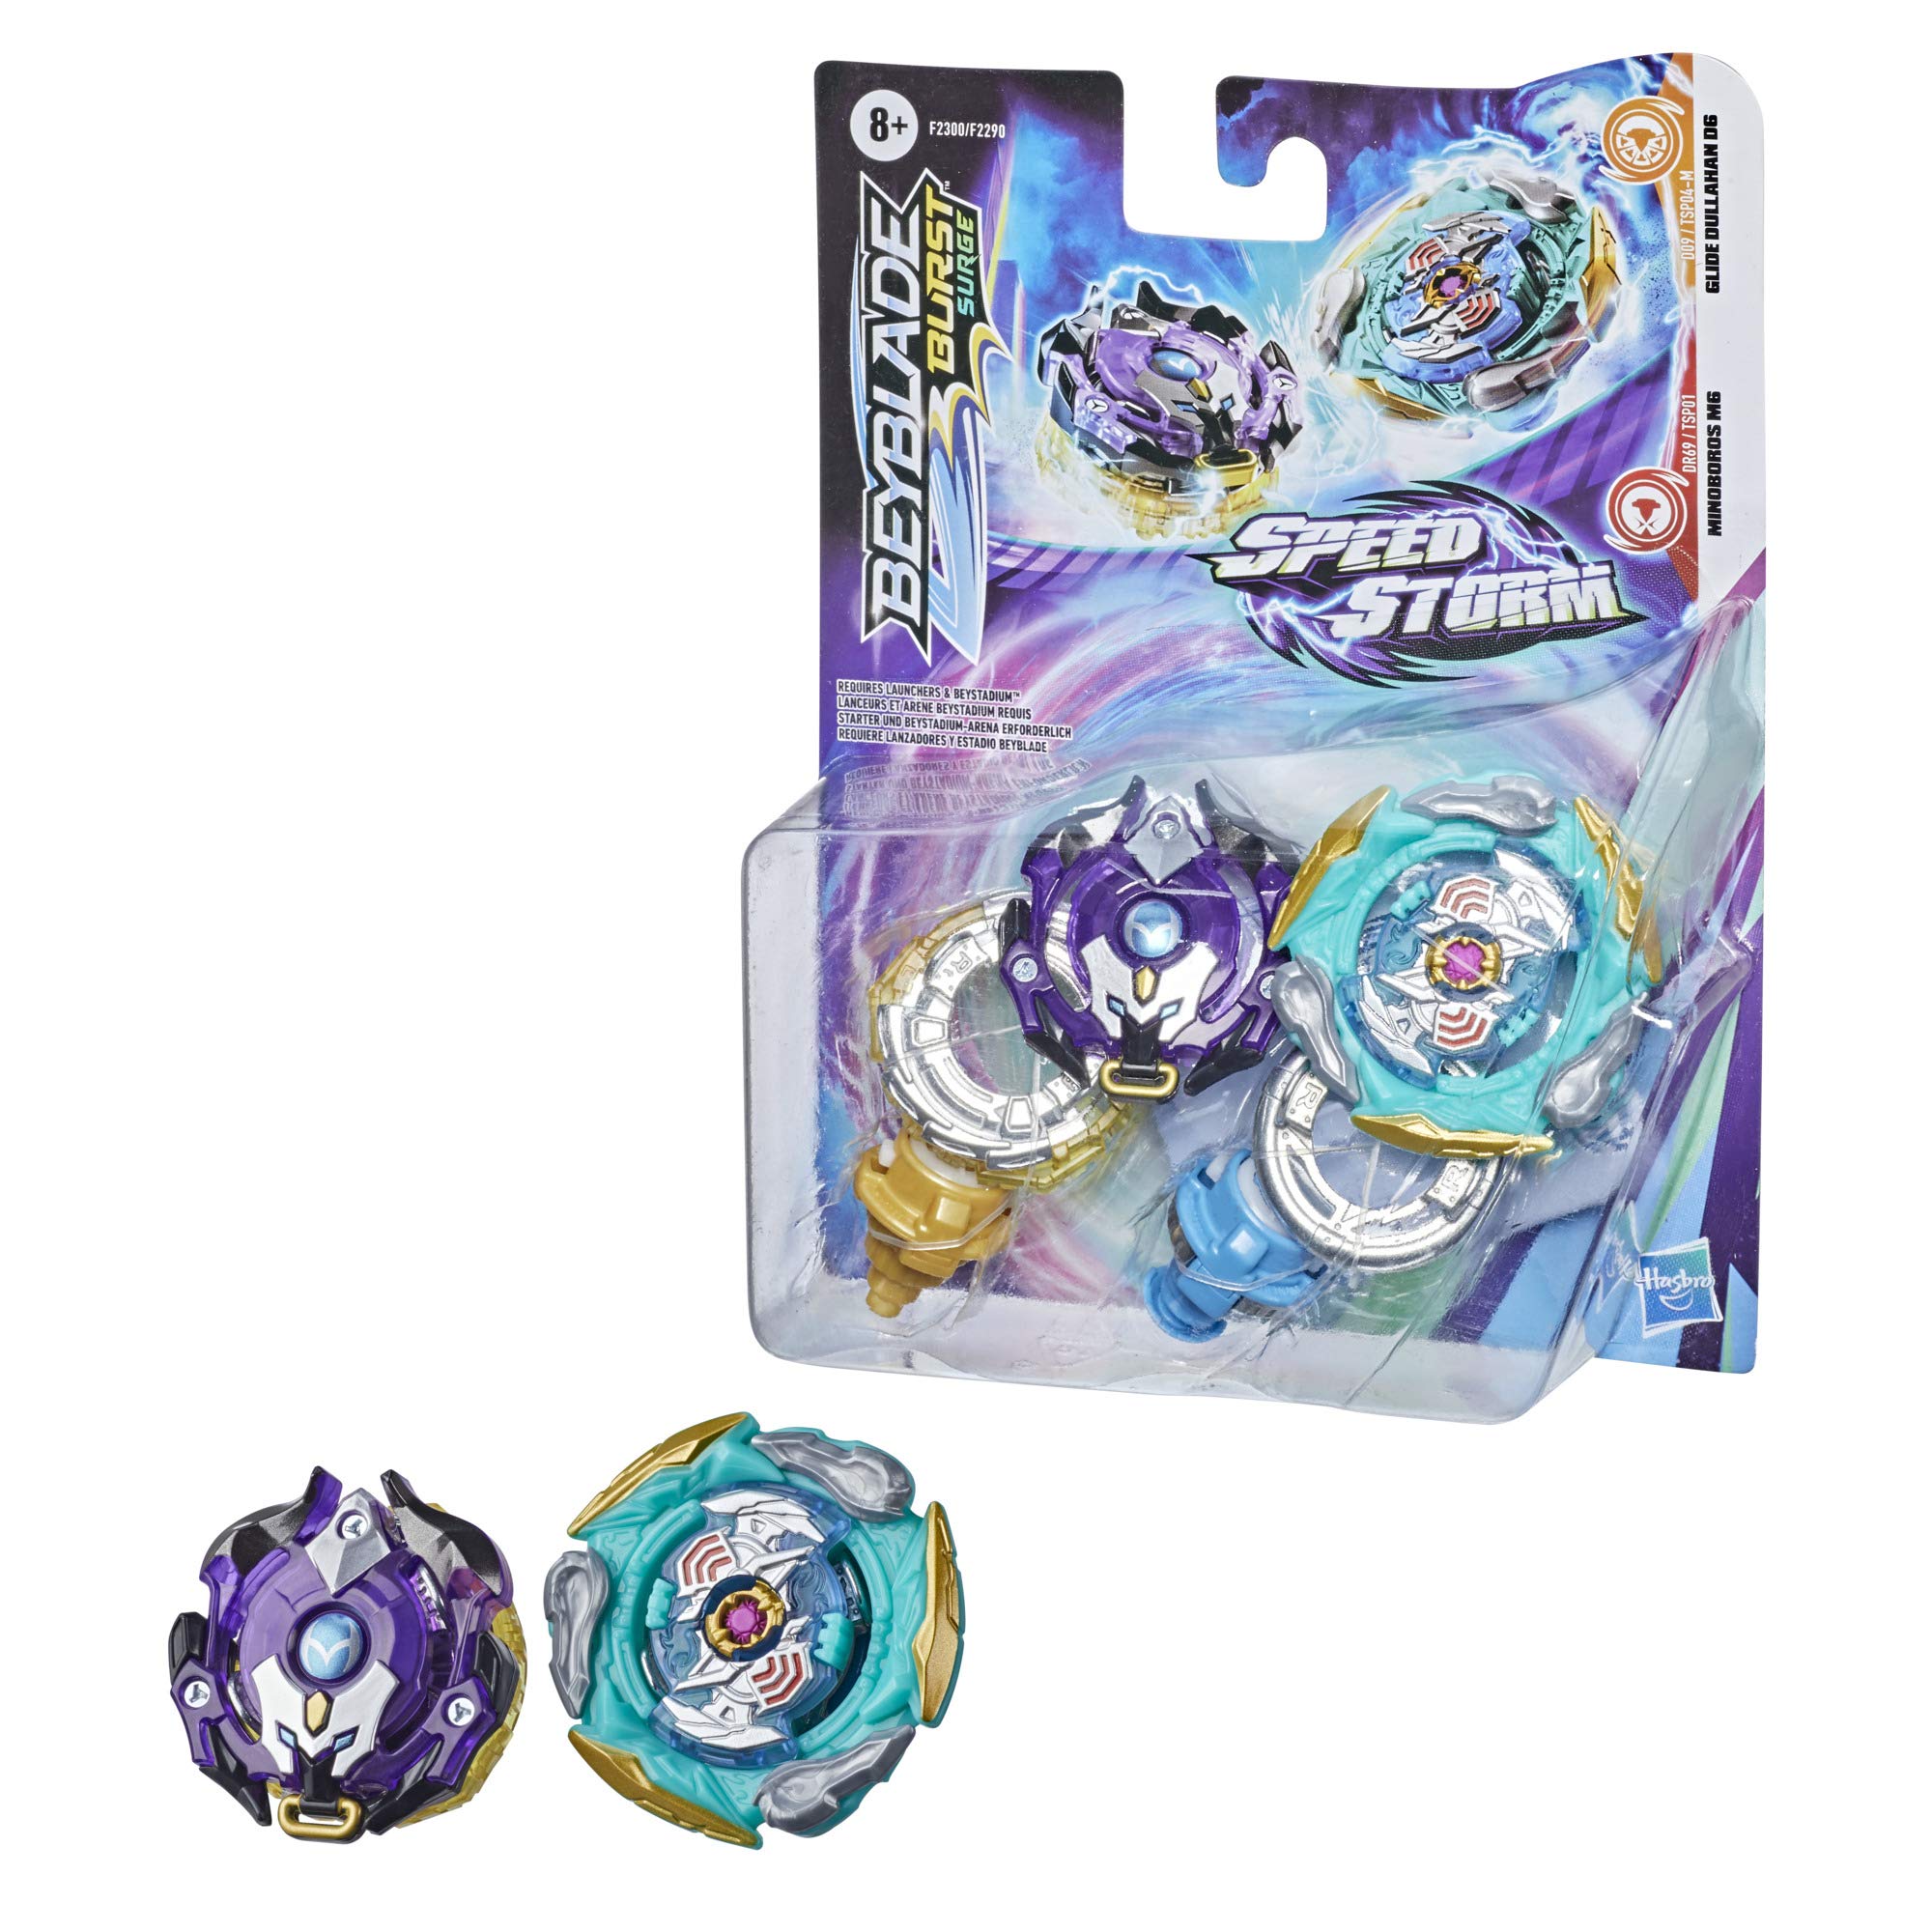 BEYBLADE Burst Surge Speedstorm Glide Dullahan D6 and Minoboros M6 Spinning Top Dual Pack -- 2 Battling Game Top Toy for Kids Ages 8 and Up